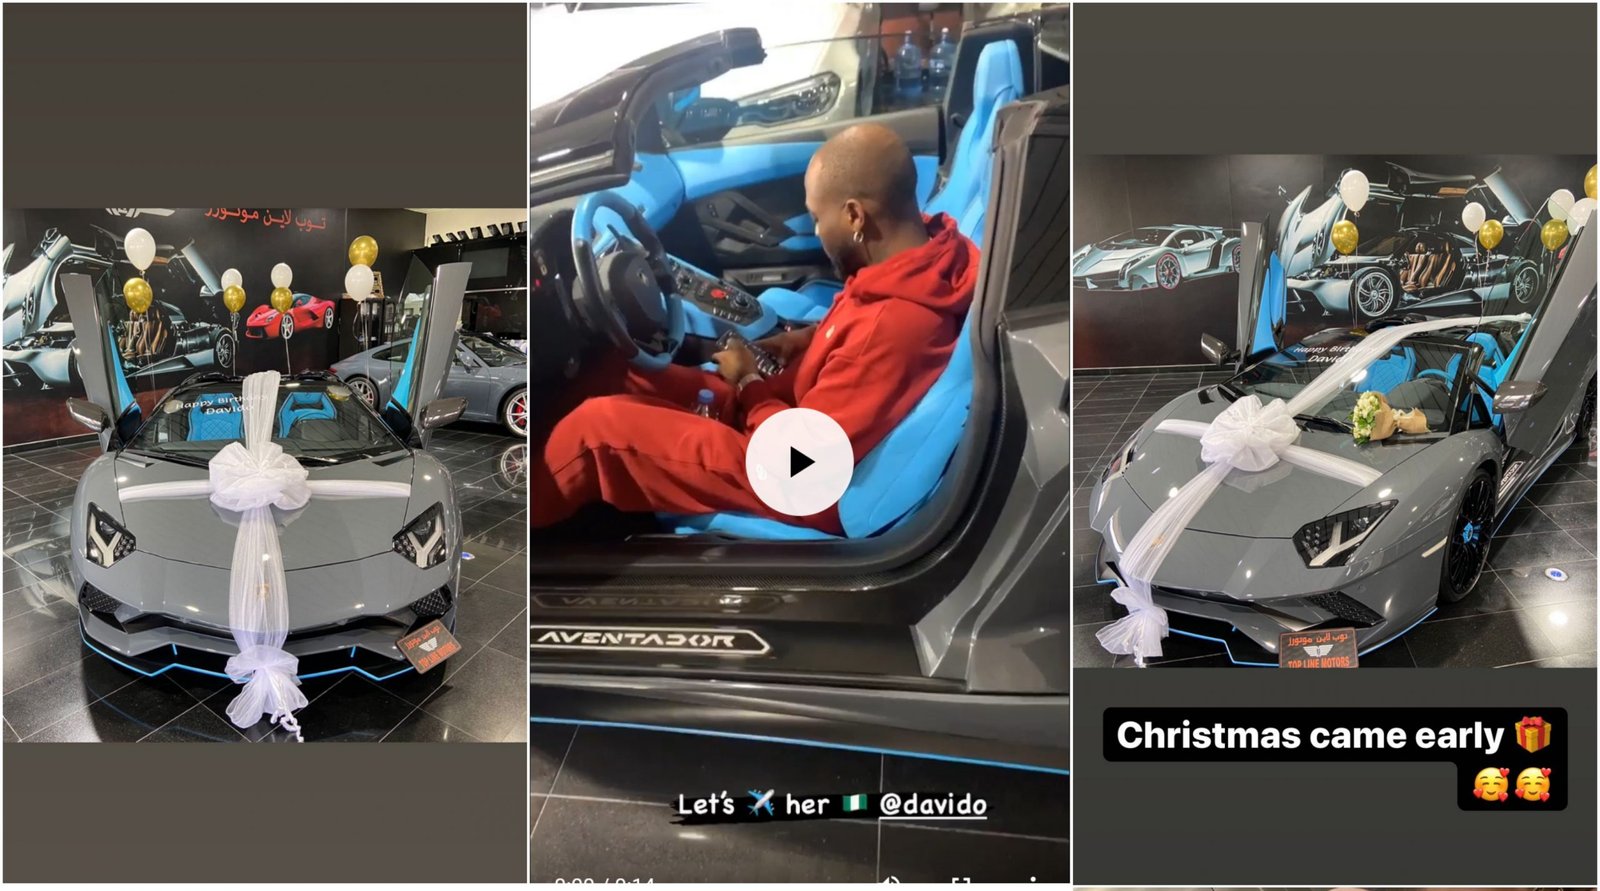 Davido buys a Lamborghini Aventador worth ₦310M Weeks after buying Roll Royce (video)